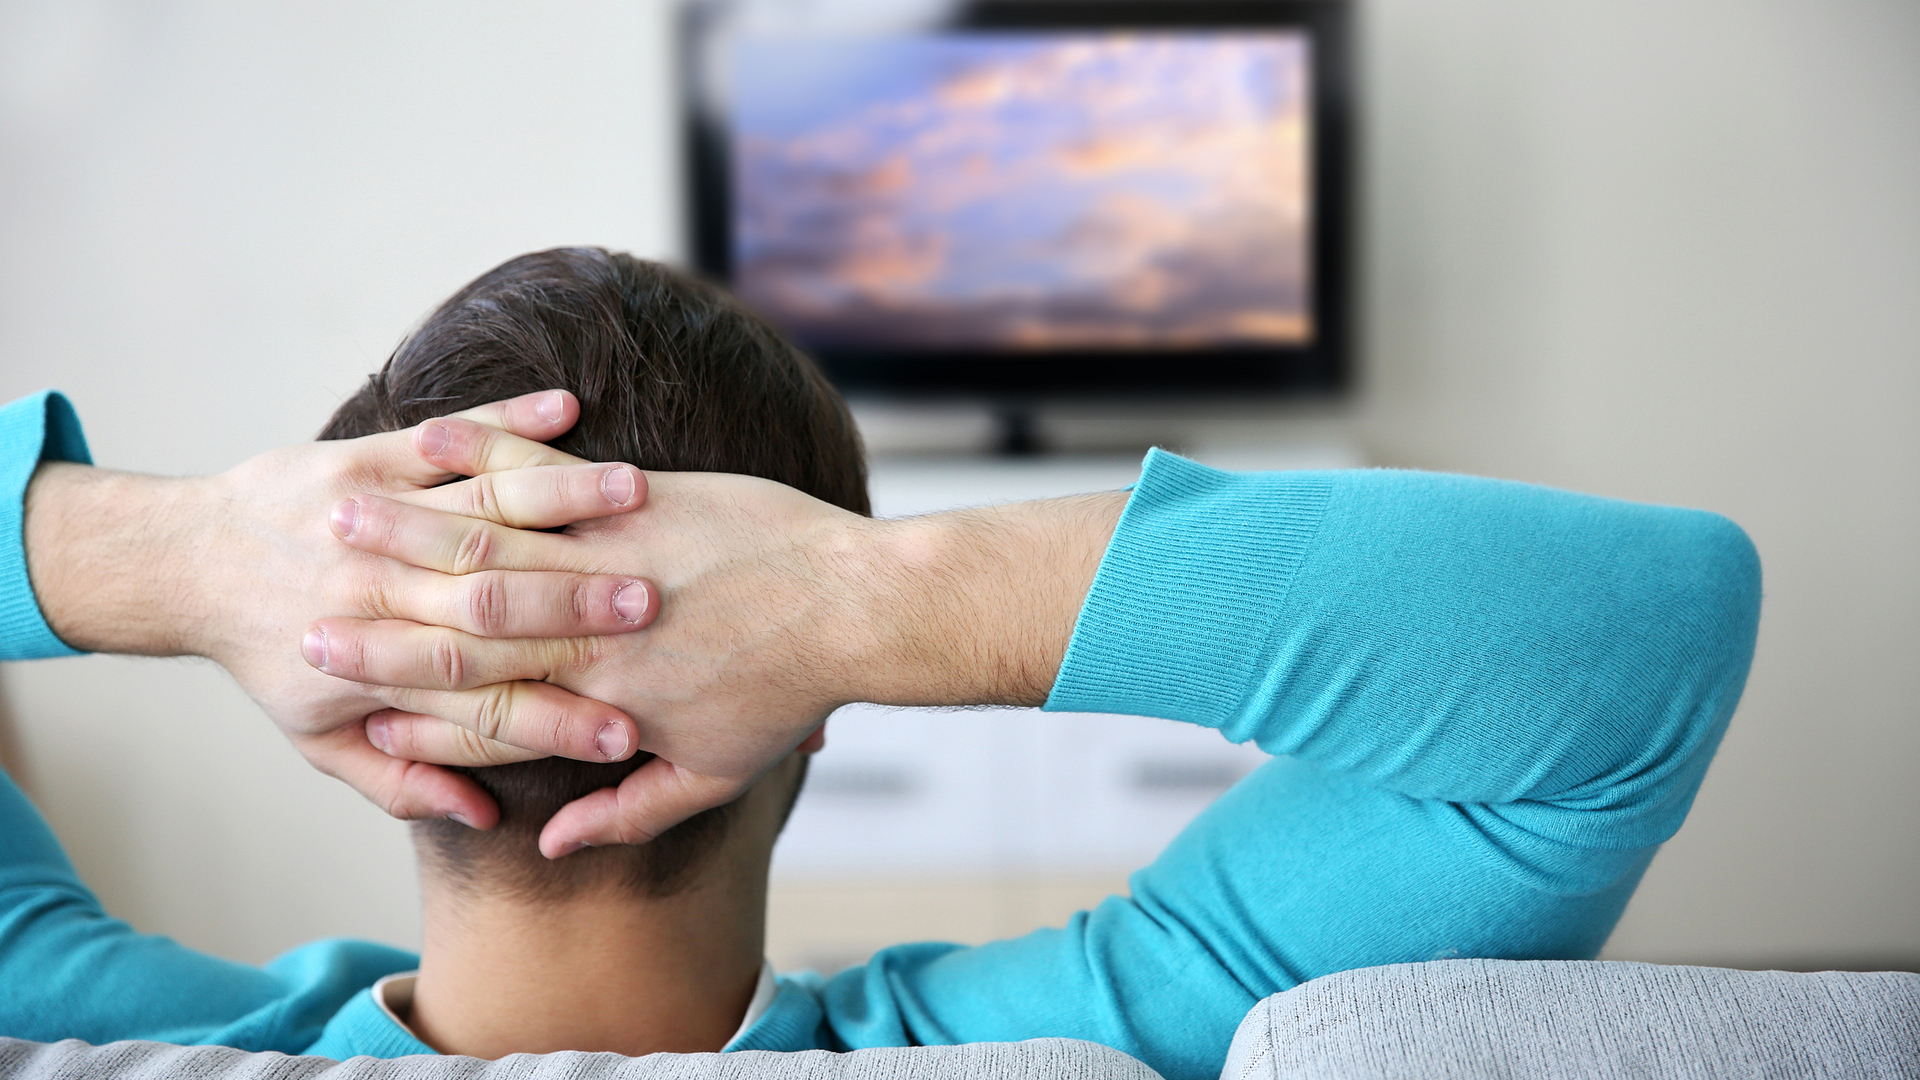 A relaxed man watches video on a flat-screen TV